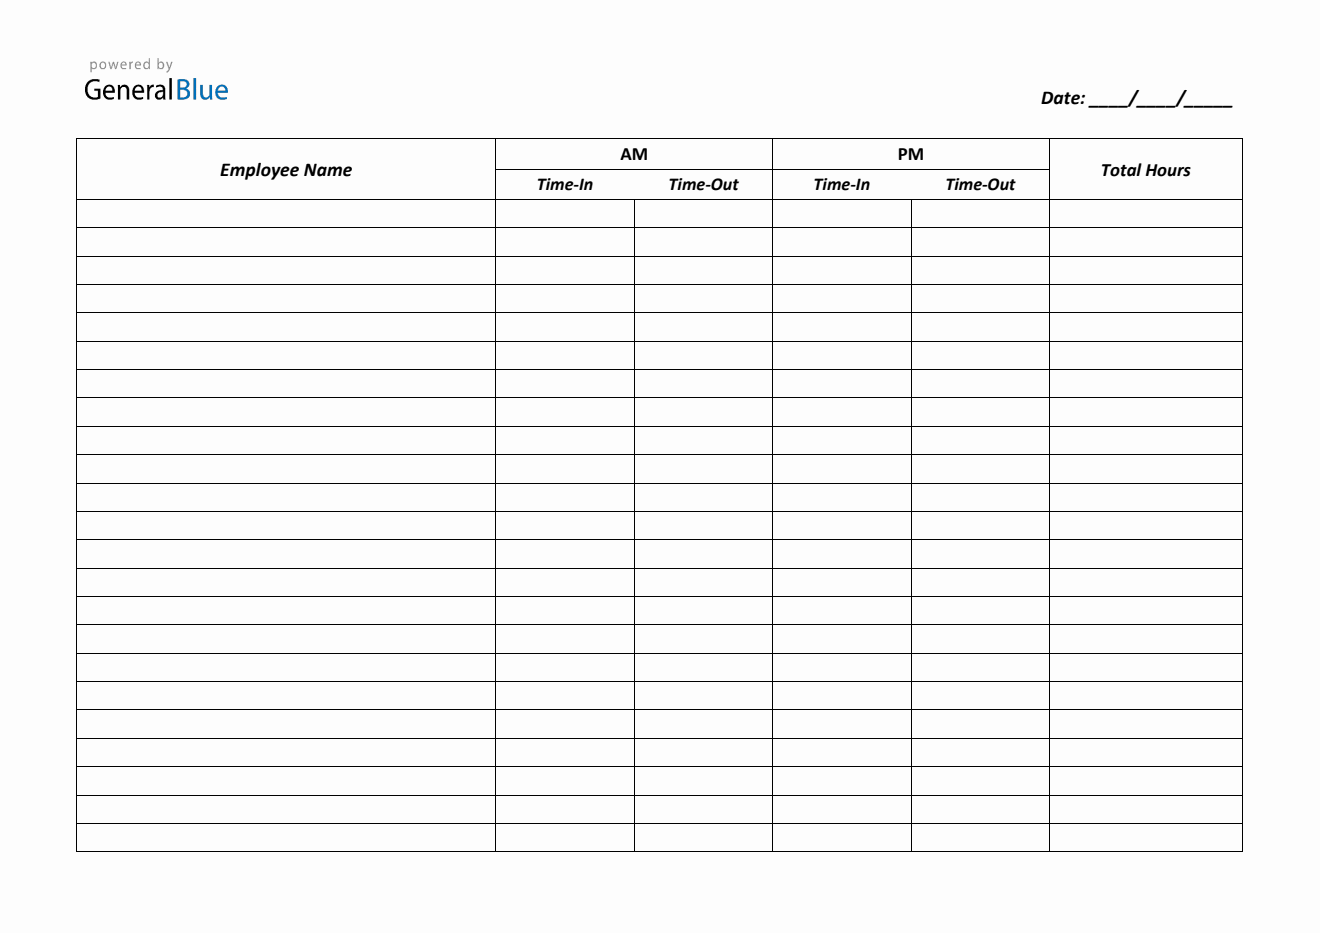 Printable Time-in and Time-Out Timesheet (PDF, A4)